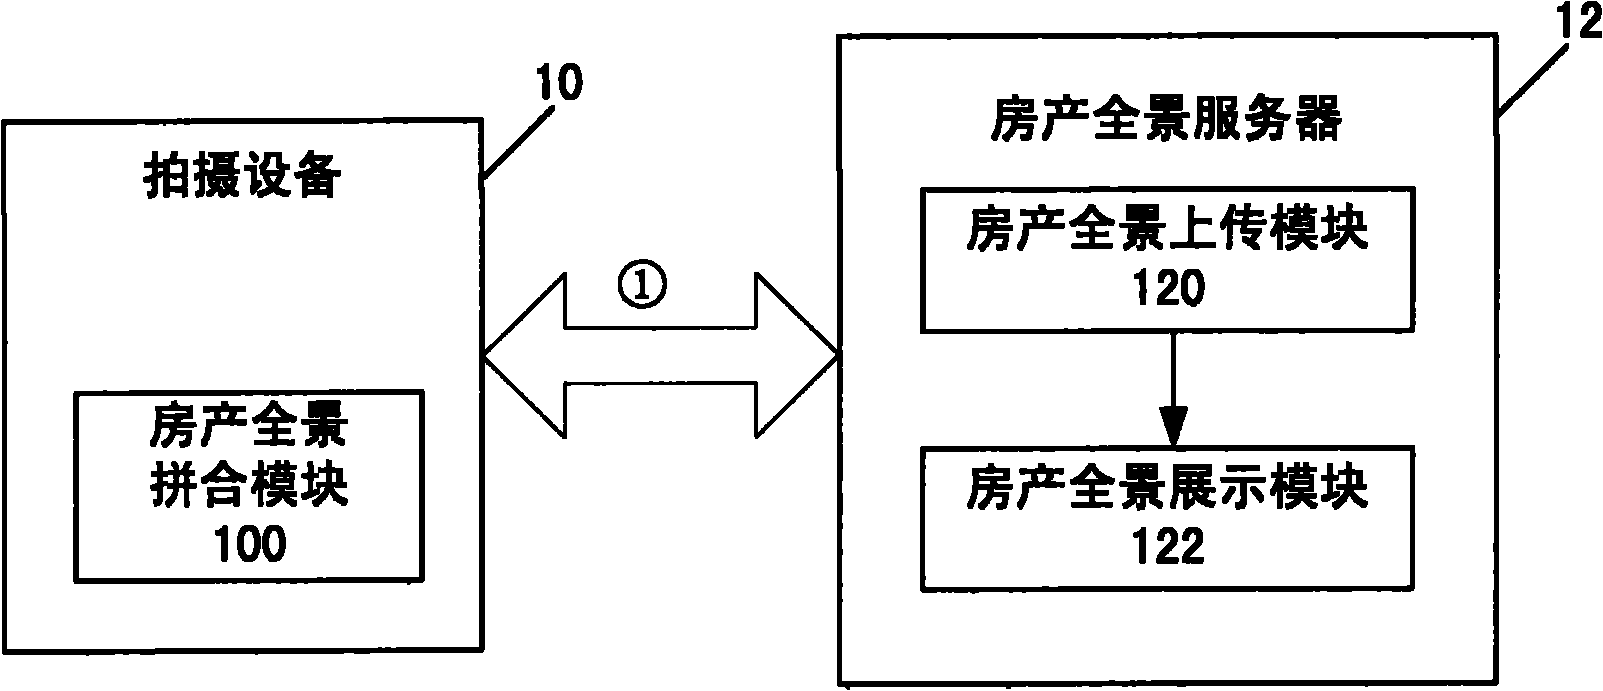 System and method for constructing house property panoramic exhibition by using portable shooting device